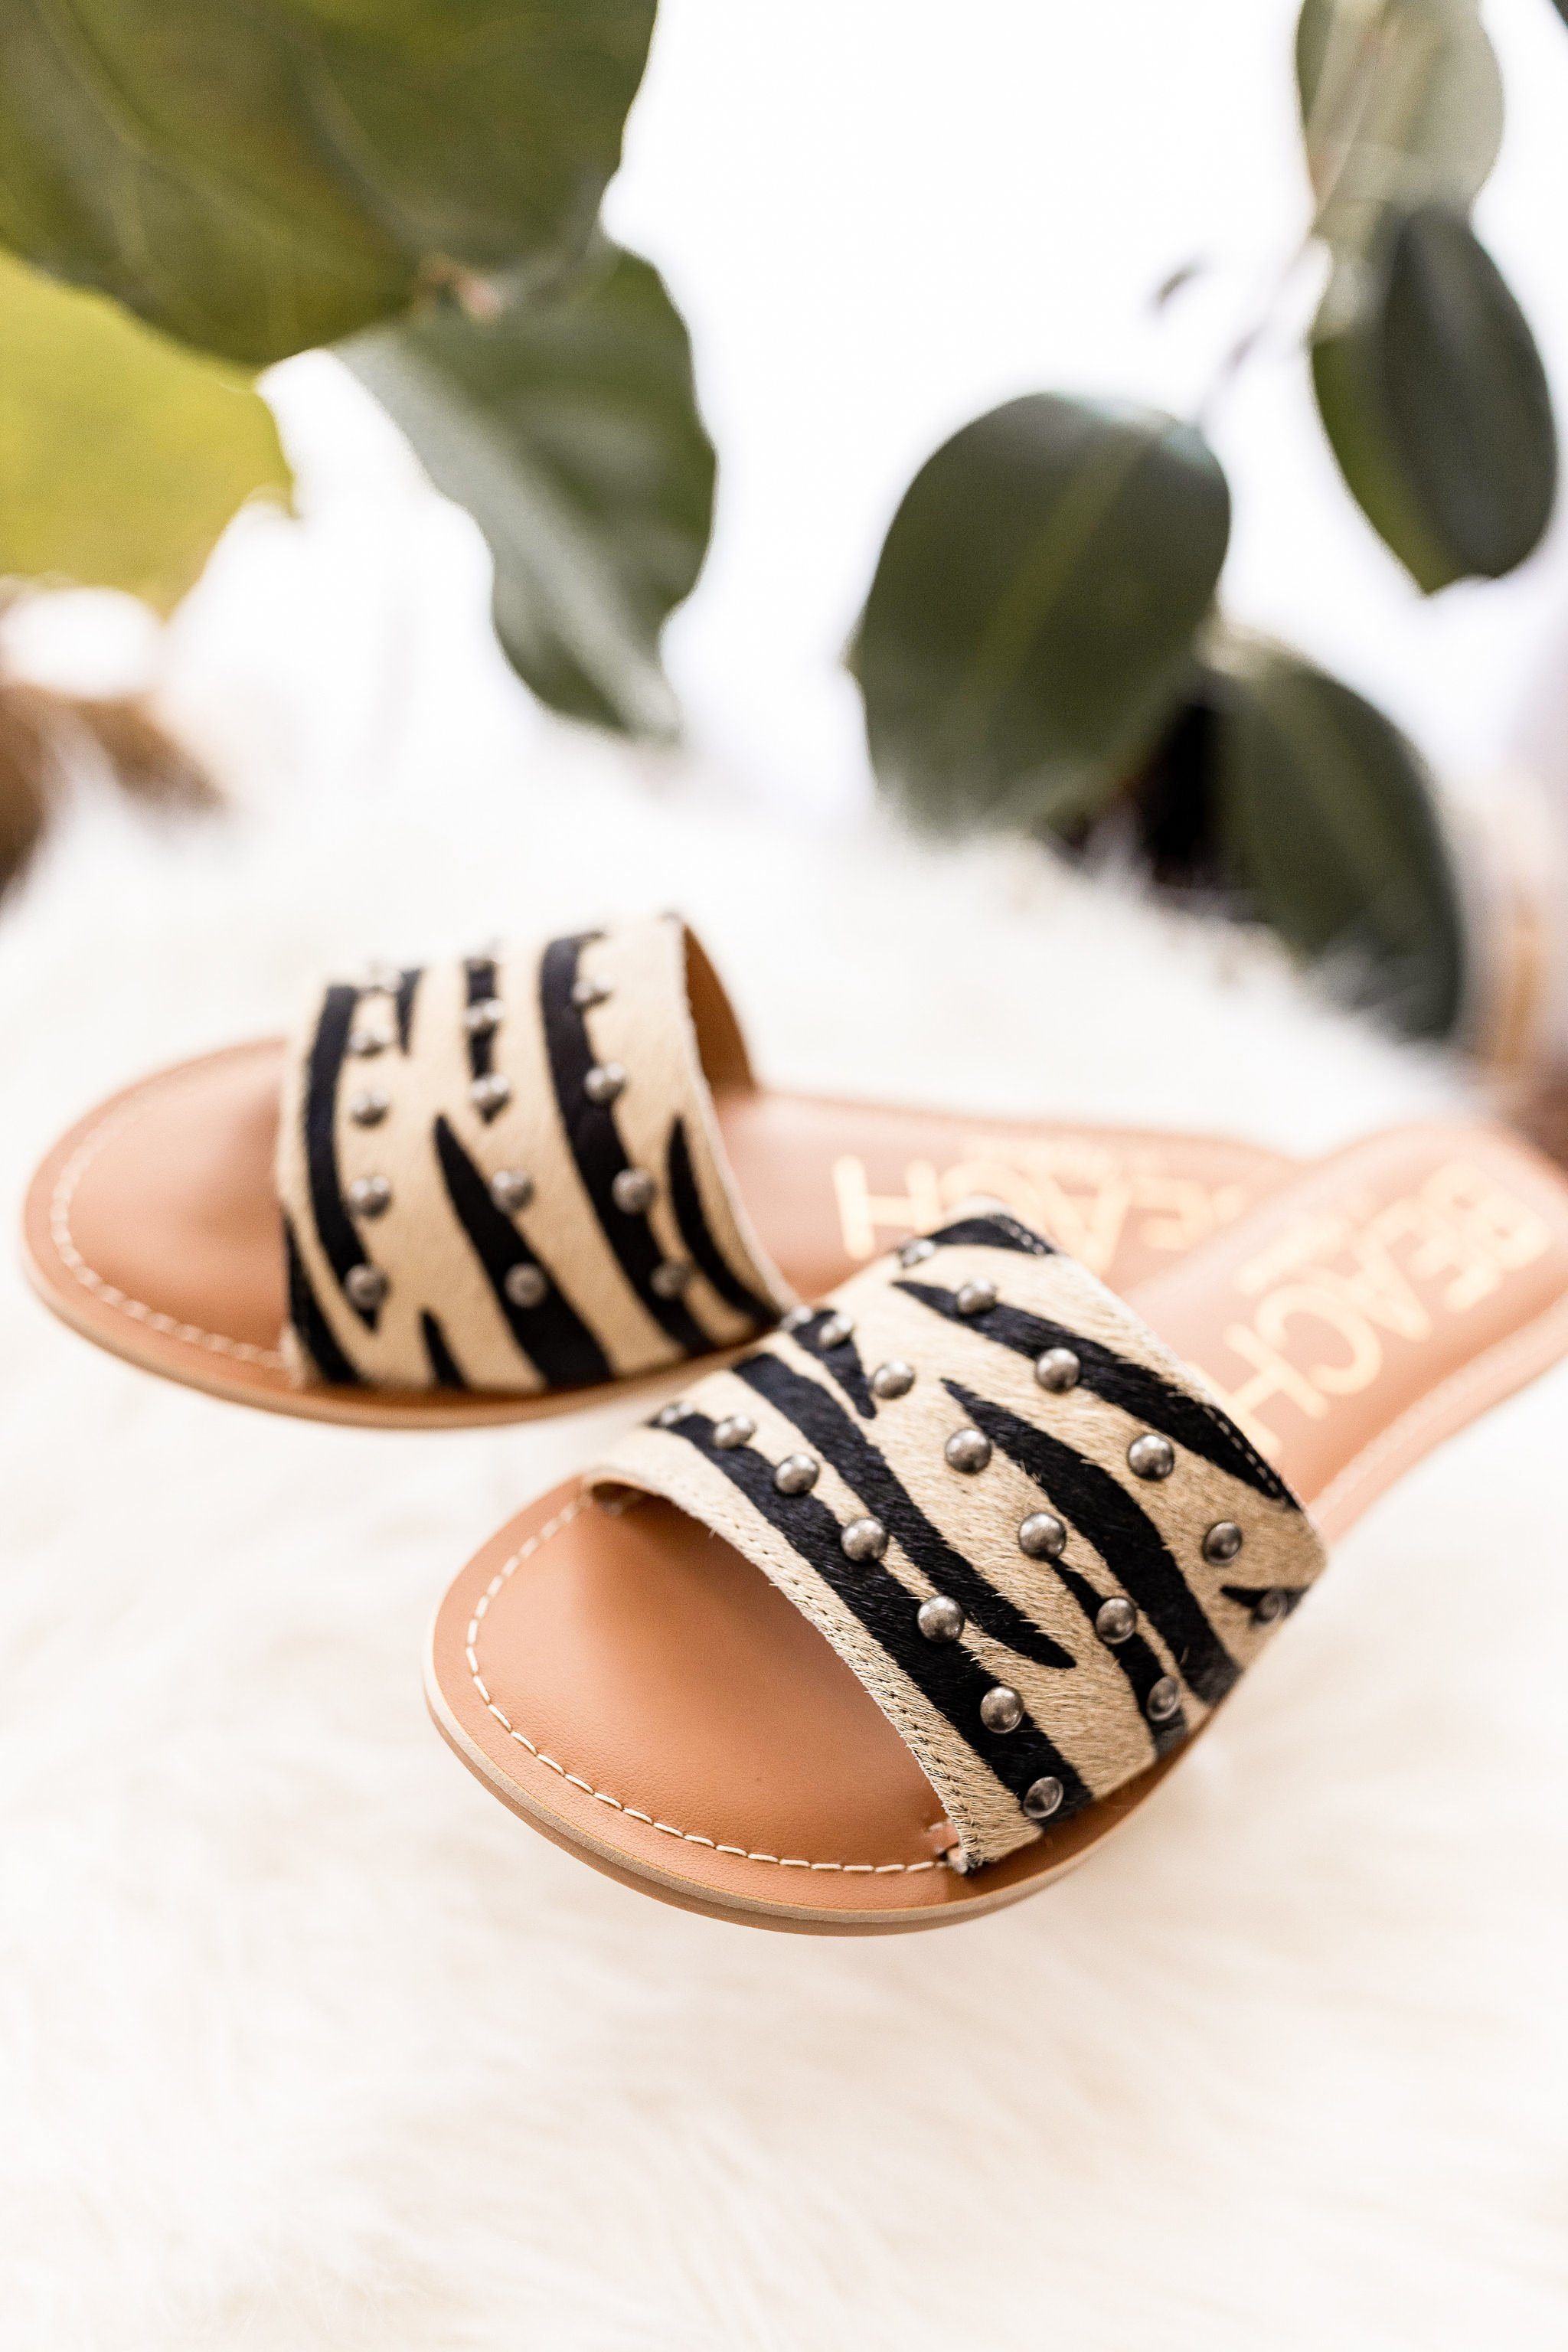 Matisse Salty Sandals in Zebra - cantonclothingcompany